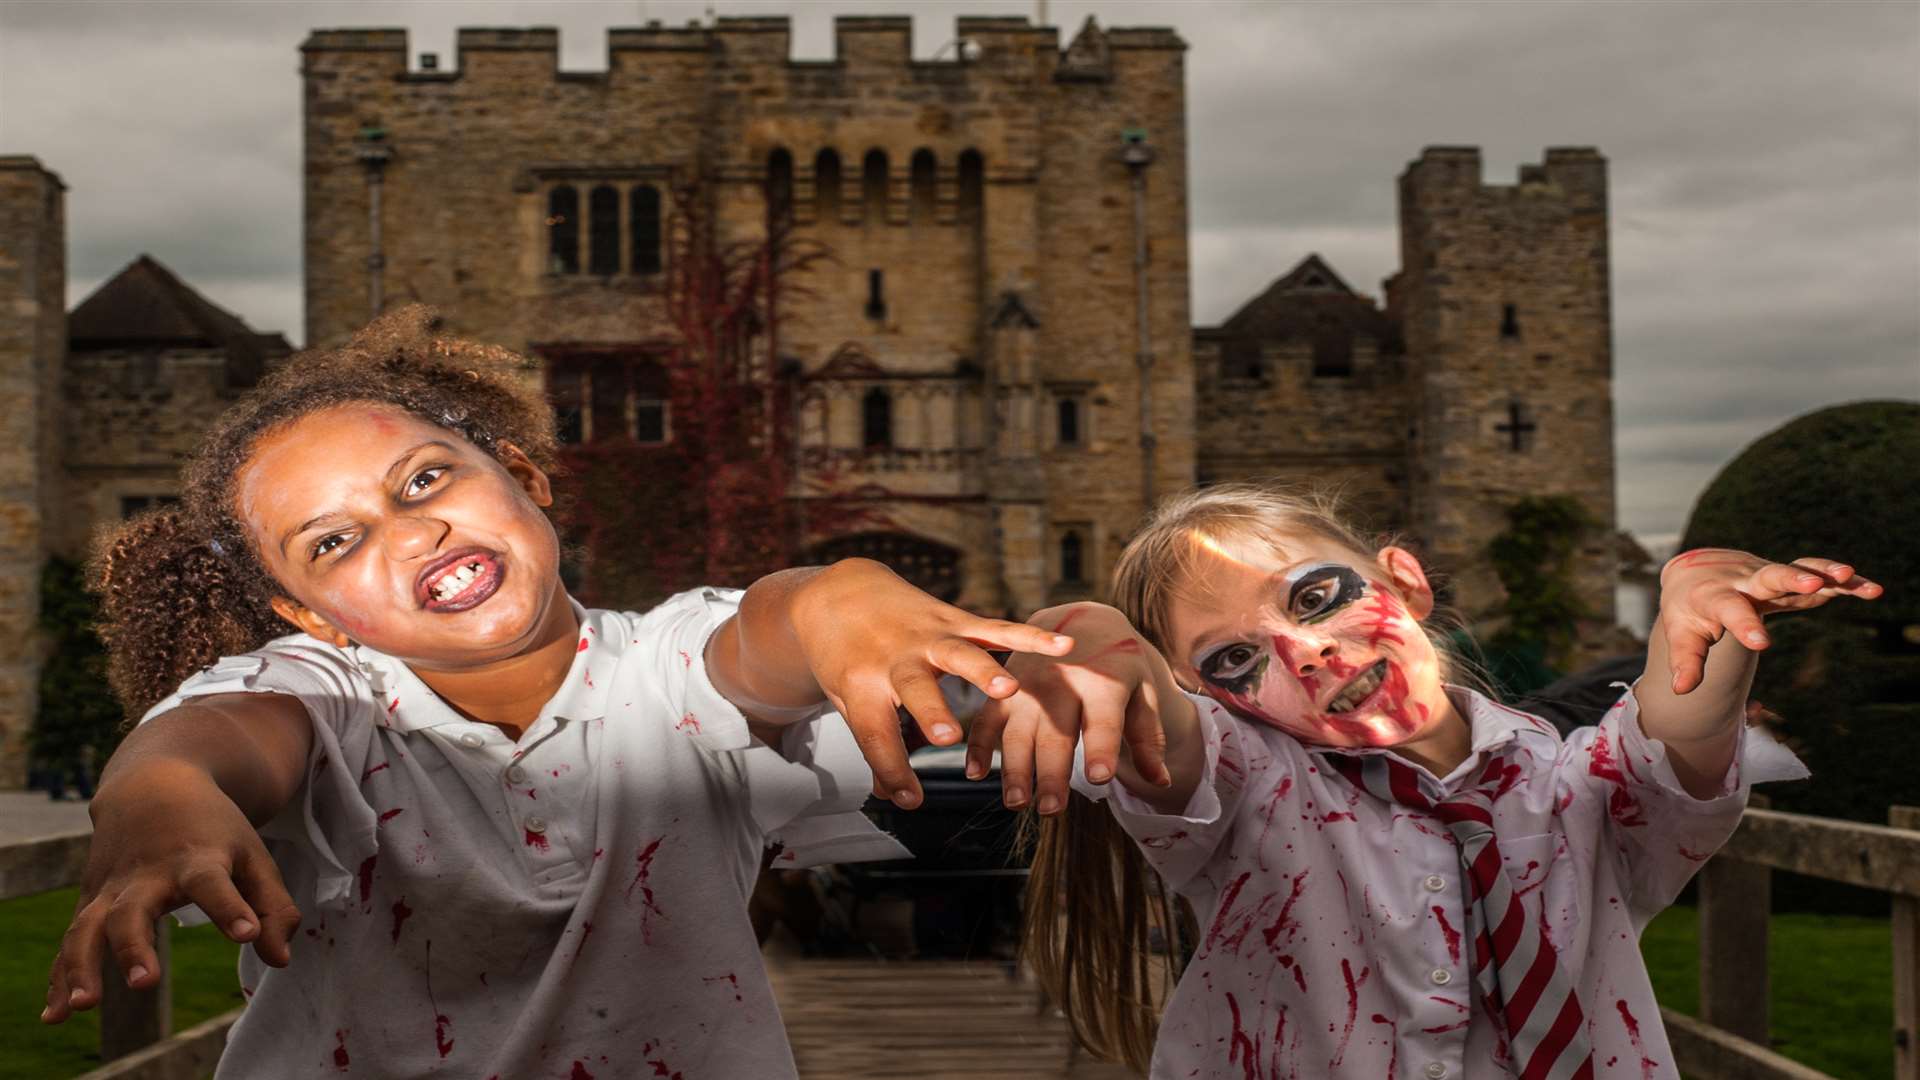 Hever Castle is hosting Halloween events from this weekend